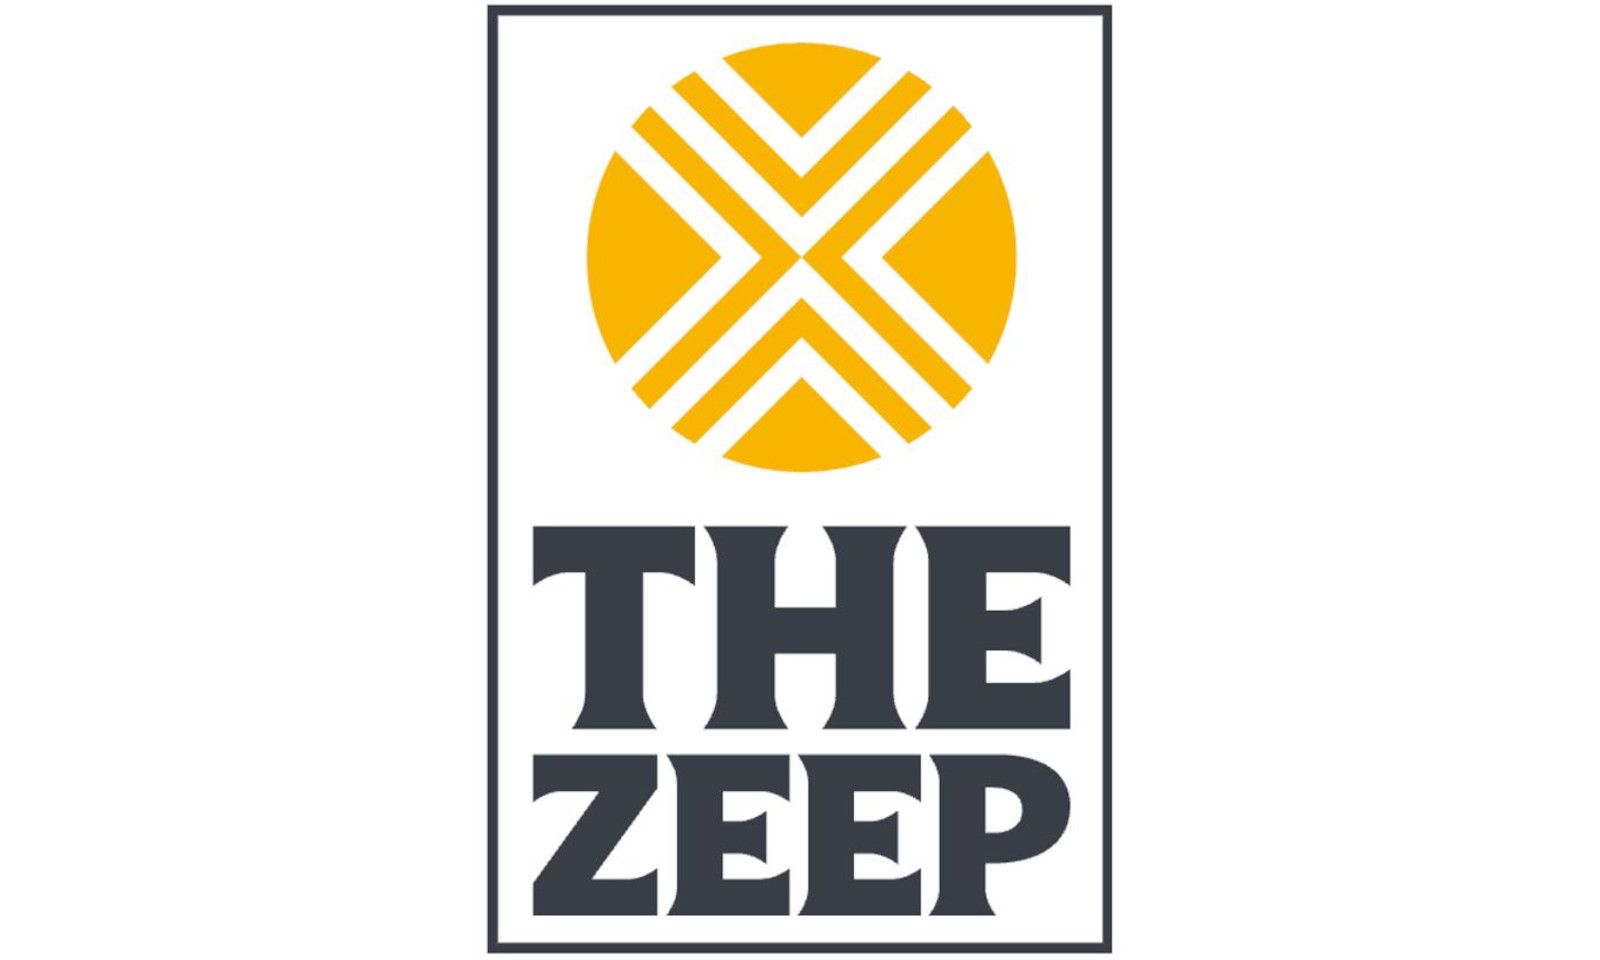 New Online Adult Marketplace Site TheZeep.com Has Launched